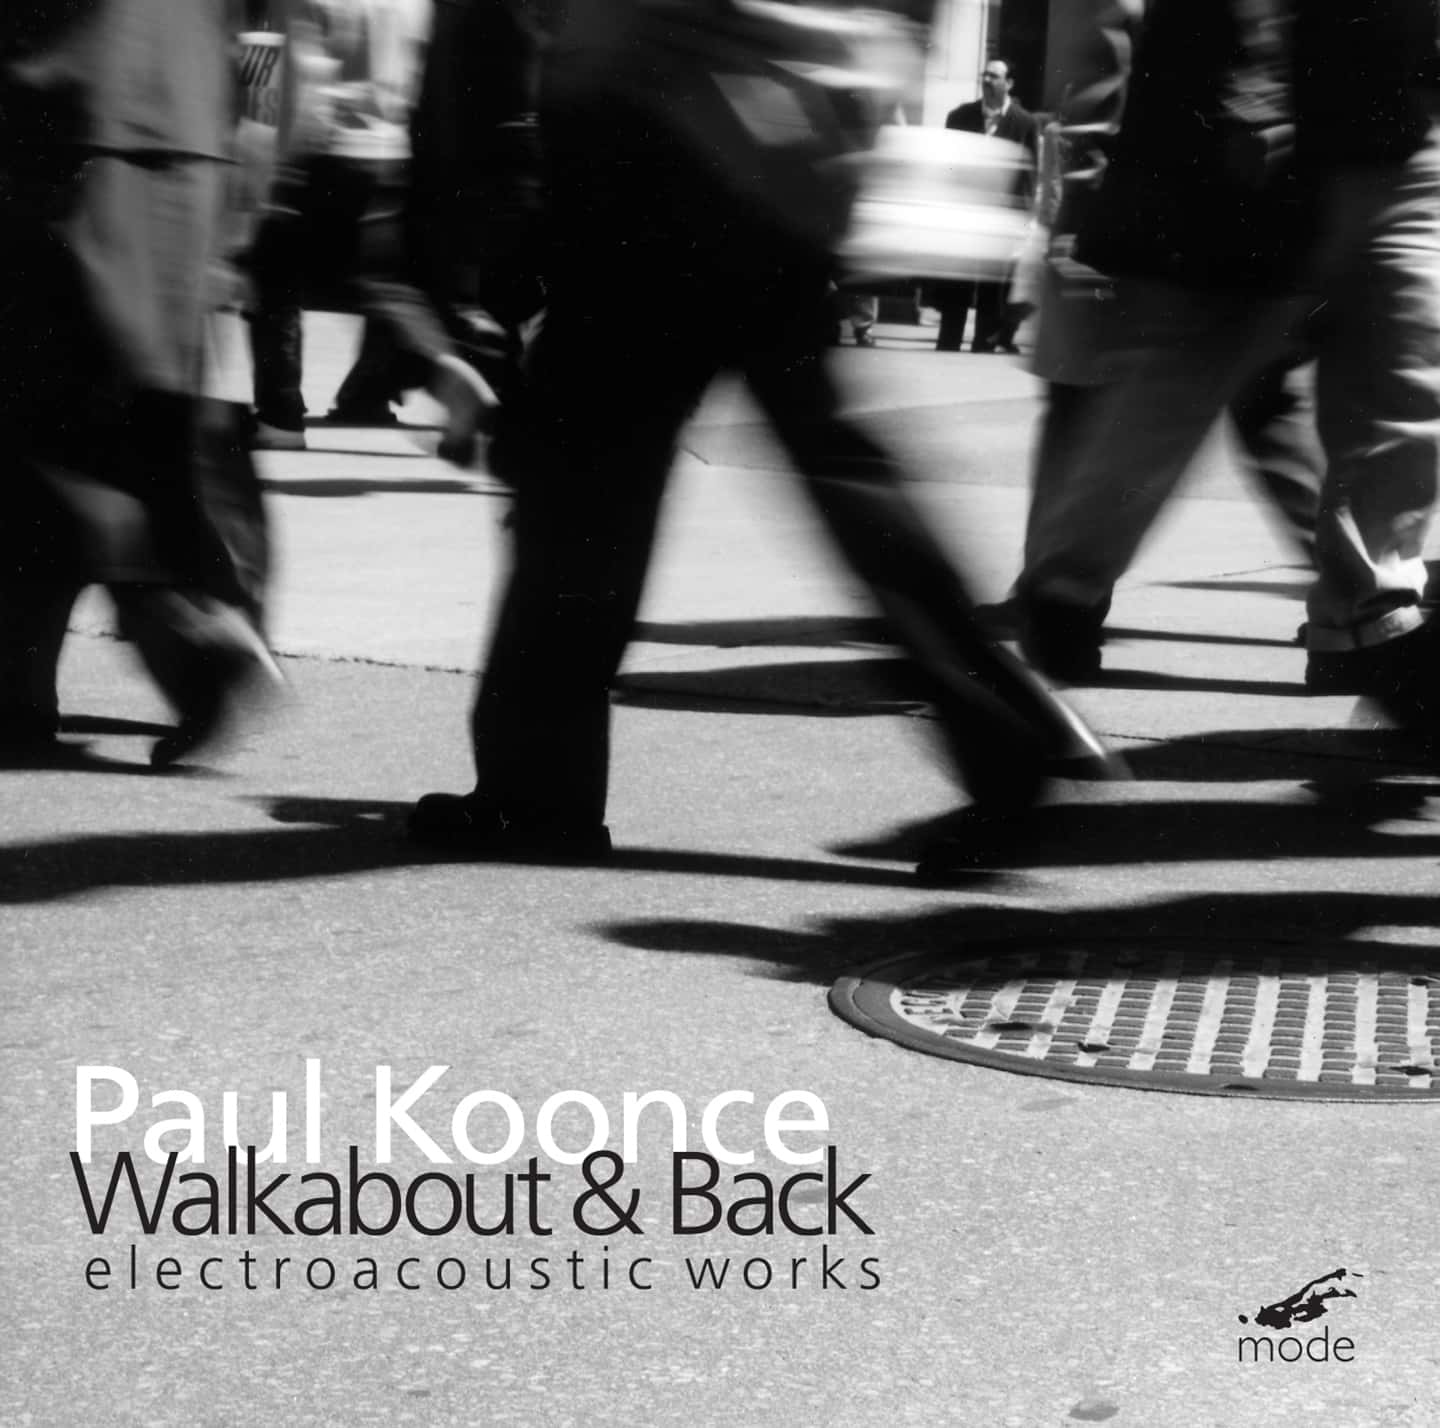 Walkabout & Back, Electoacoustic Works